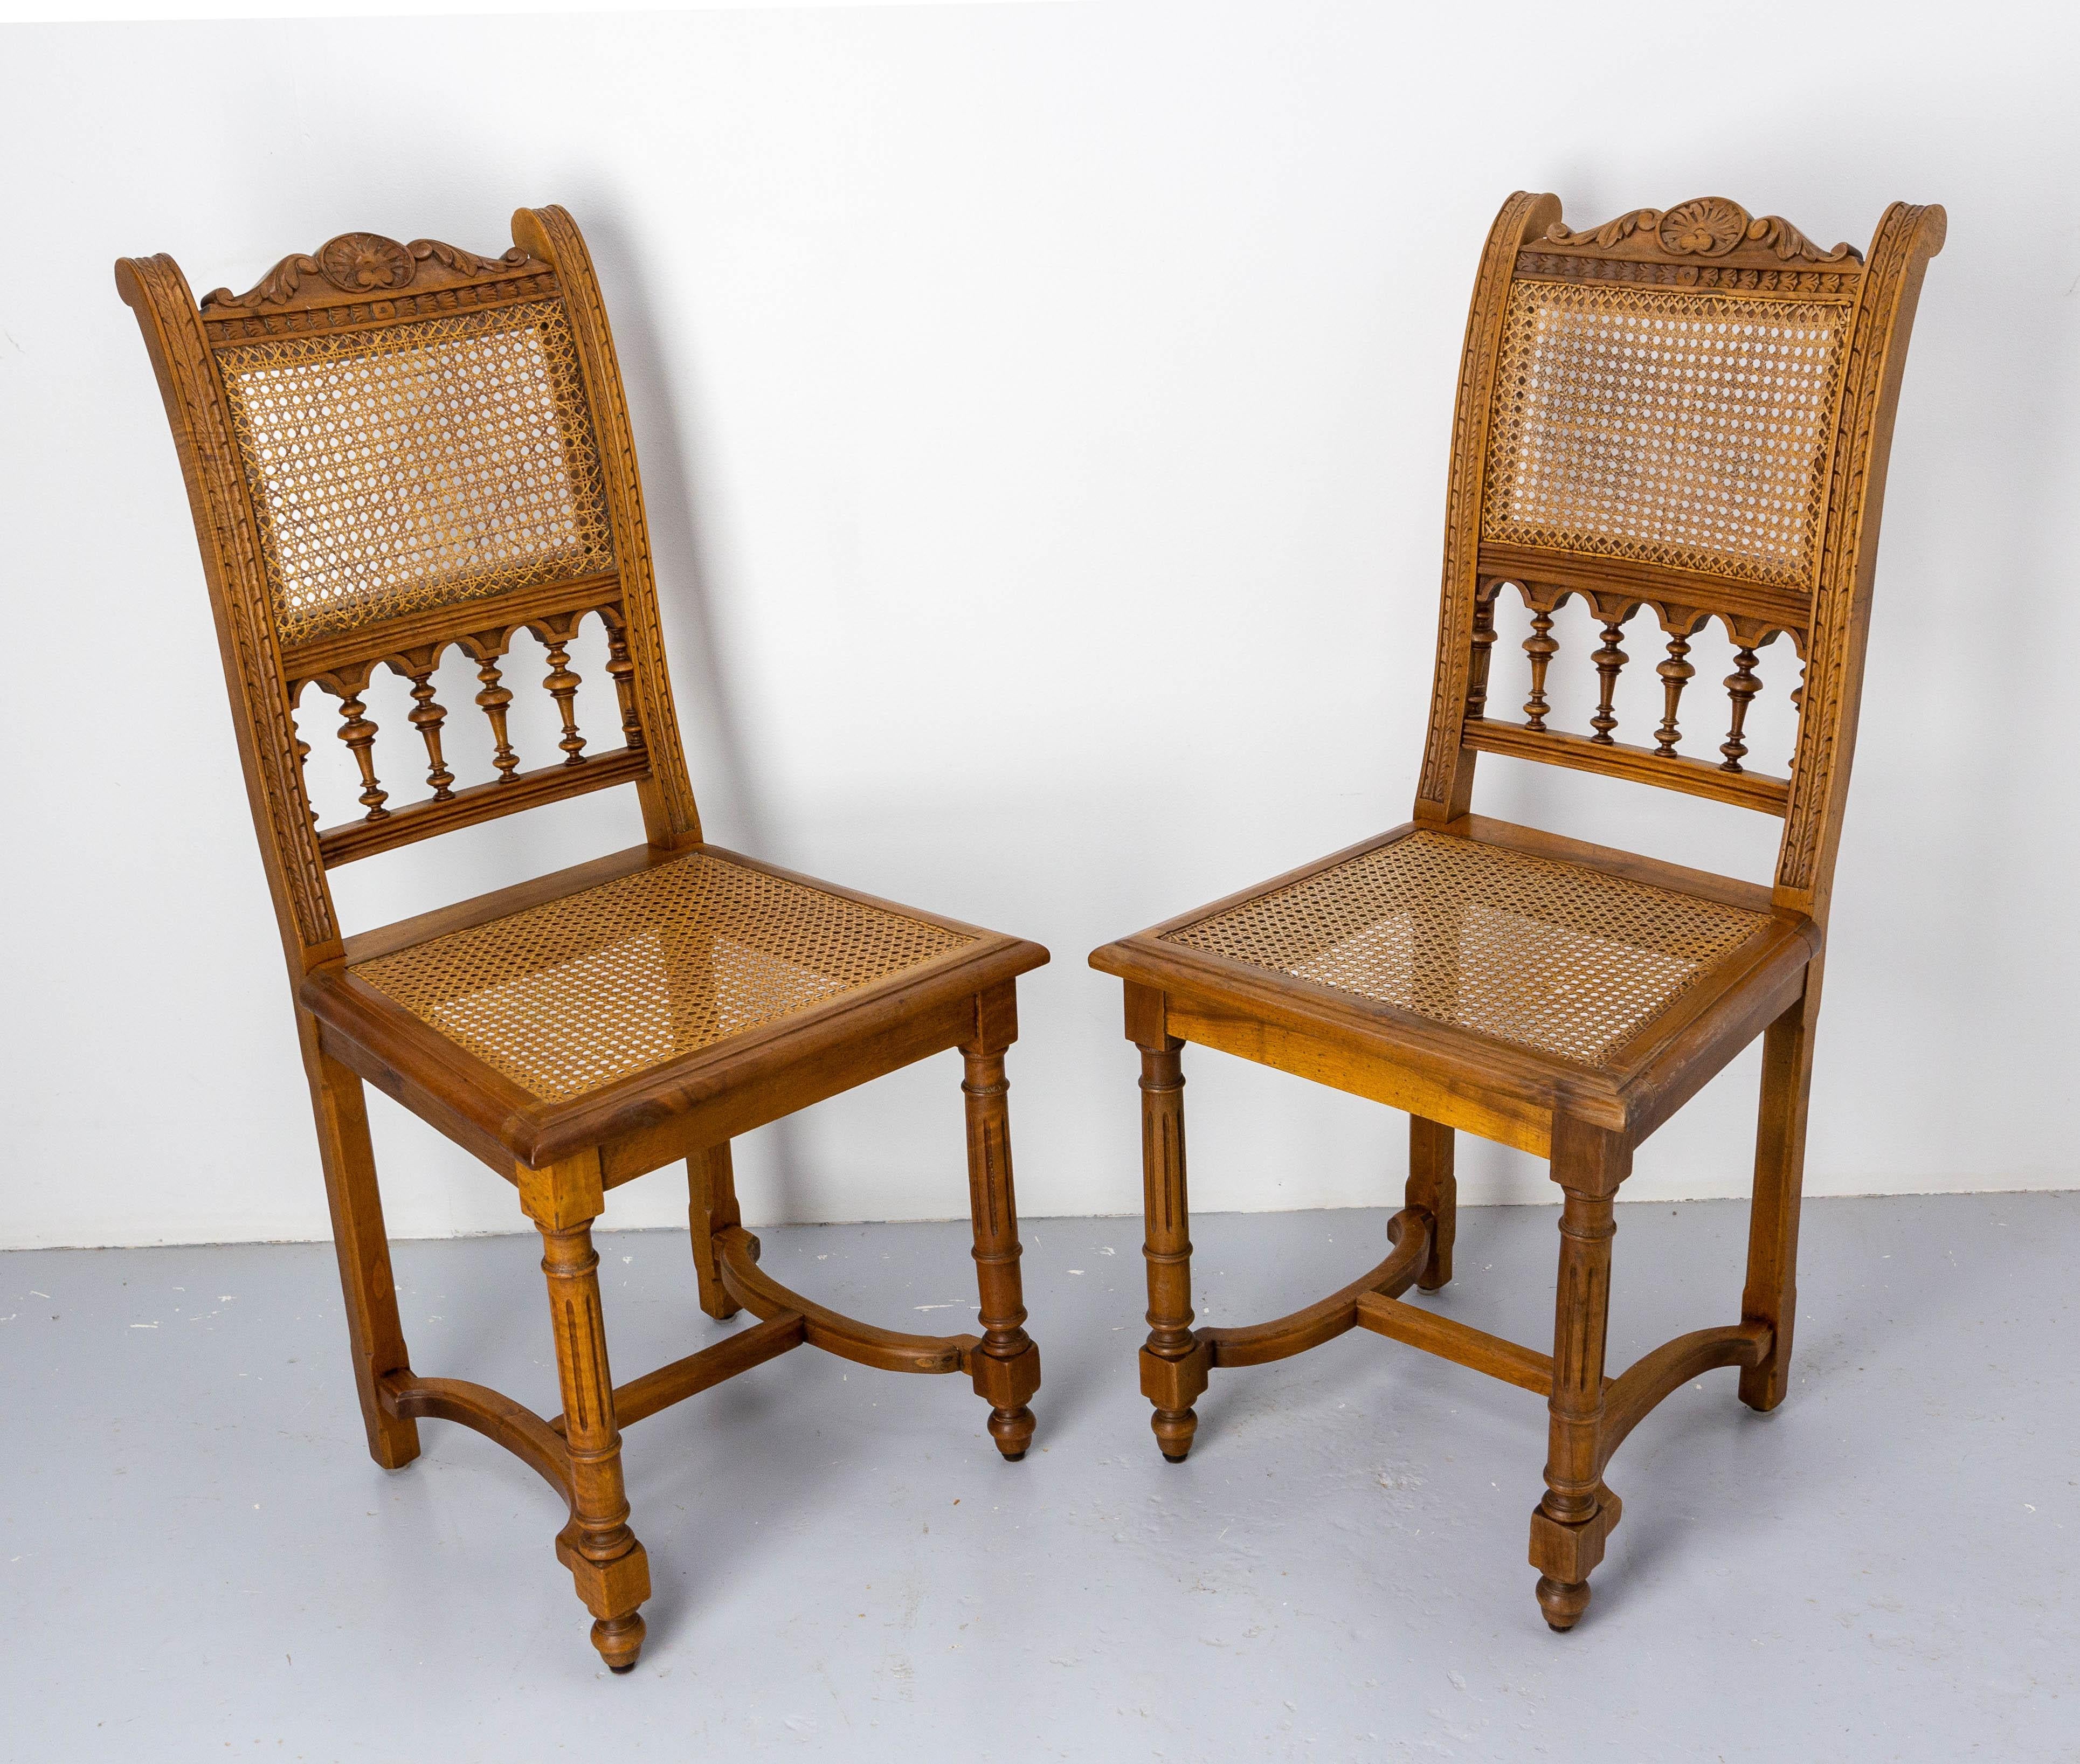 19th Century Four Chairs Walnut and Cane in the Louis XIII Style, French, circa 1900 For Sale